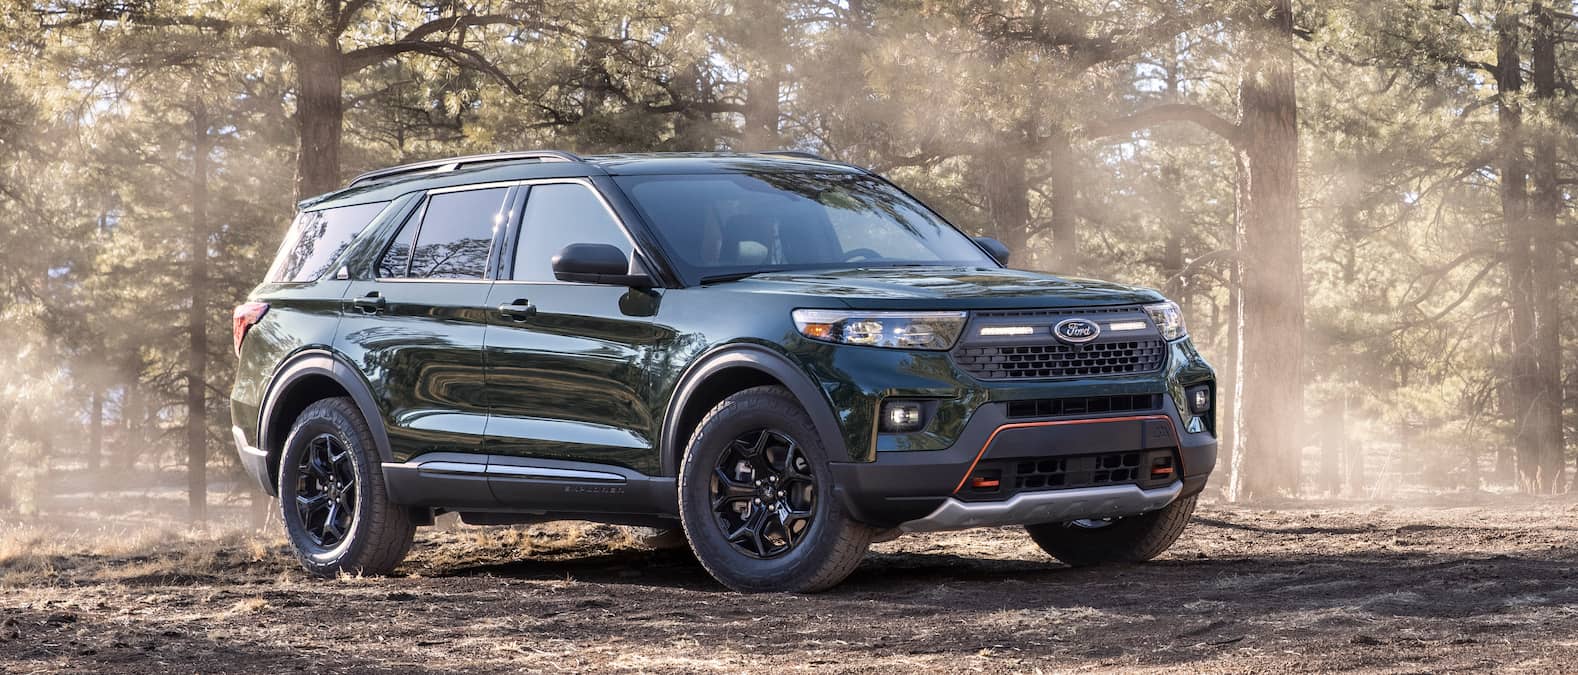 2021 Ford Explorer Timberline front three quarters